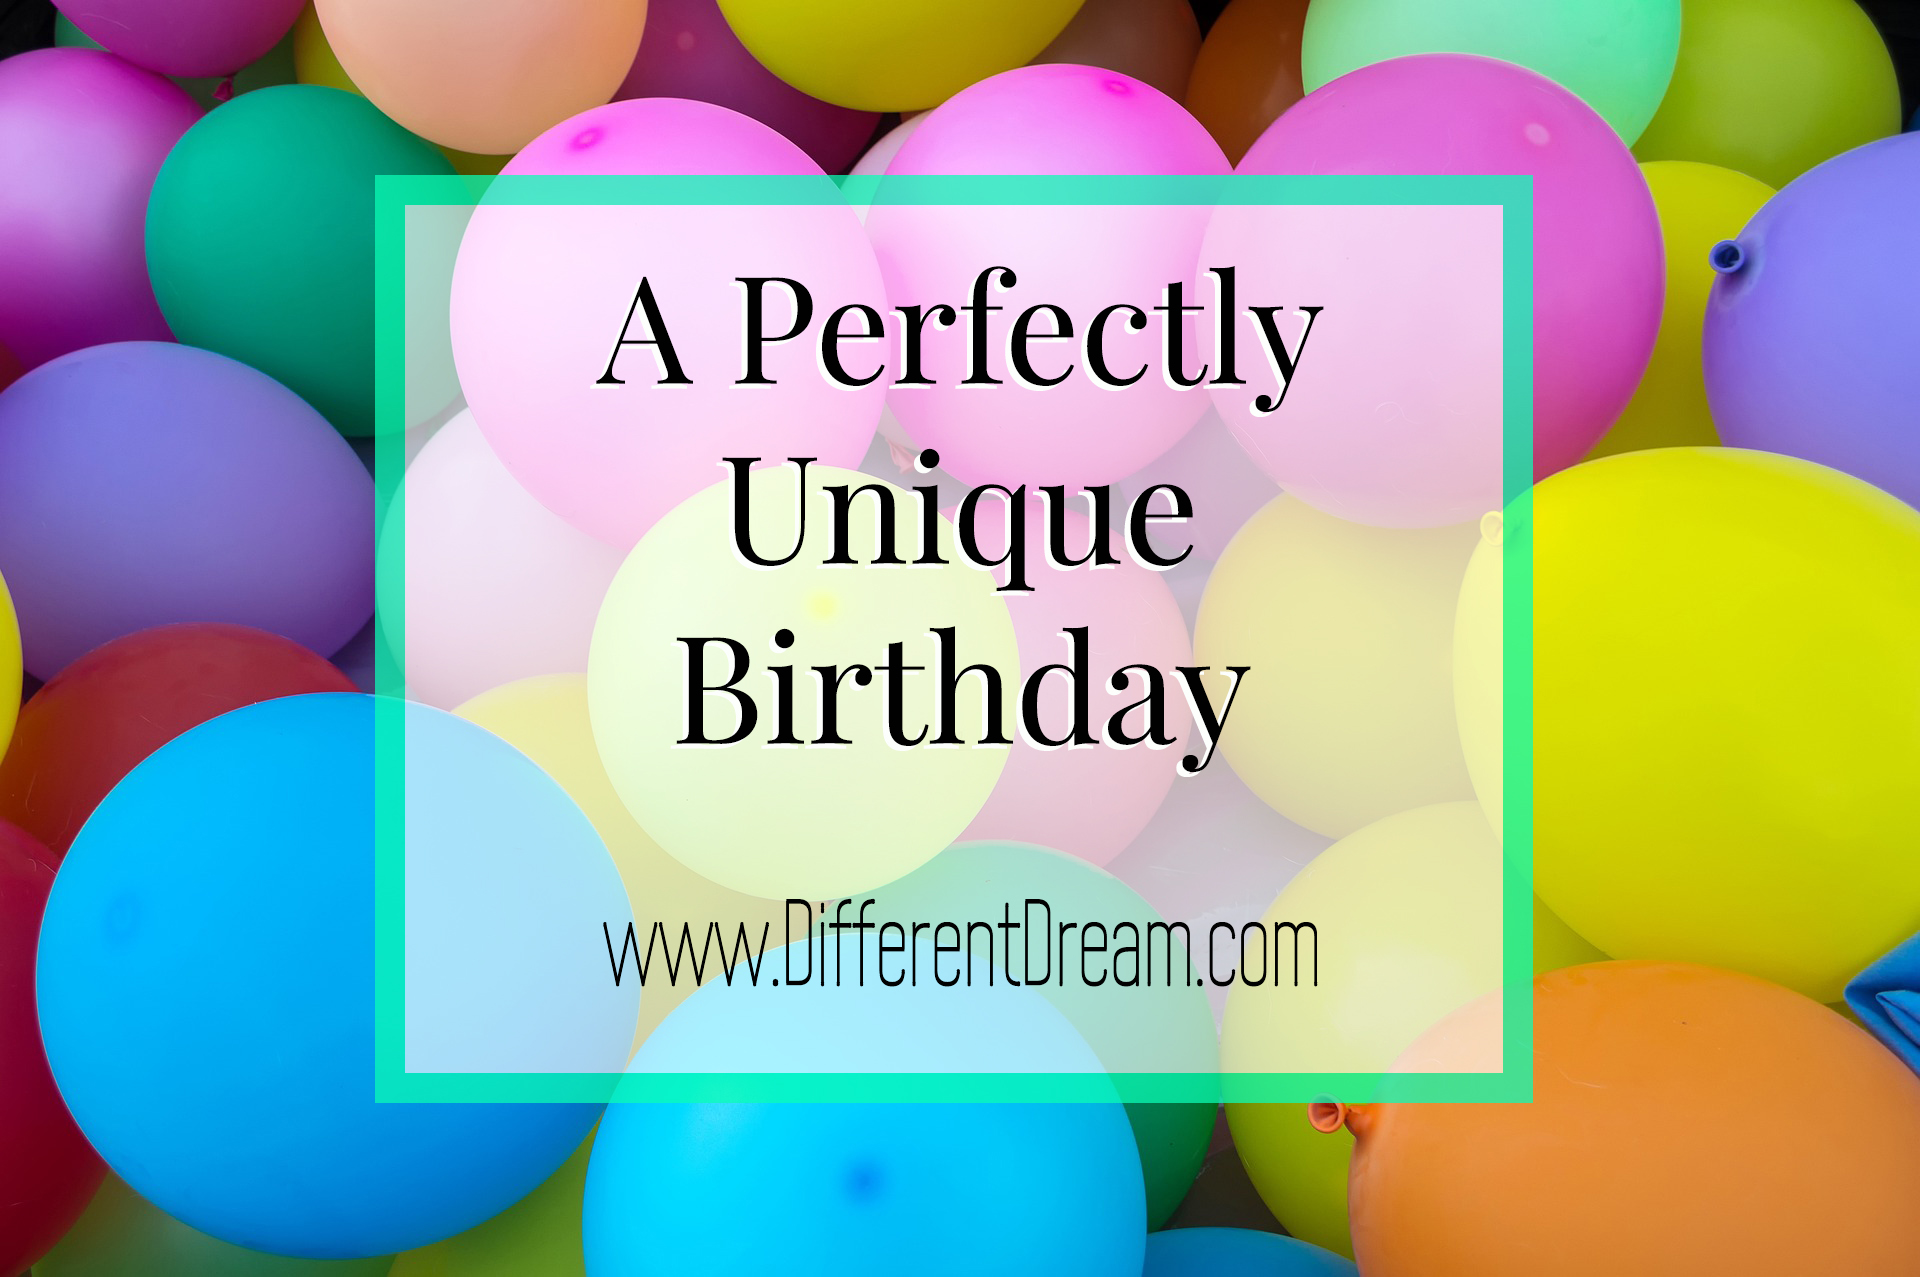 What Does a Happy Birthday Look Like? Guest blogger Mark Arnold explains how he made his son's birthday uniquely perfect.